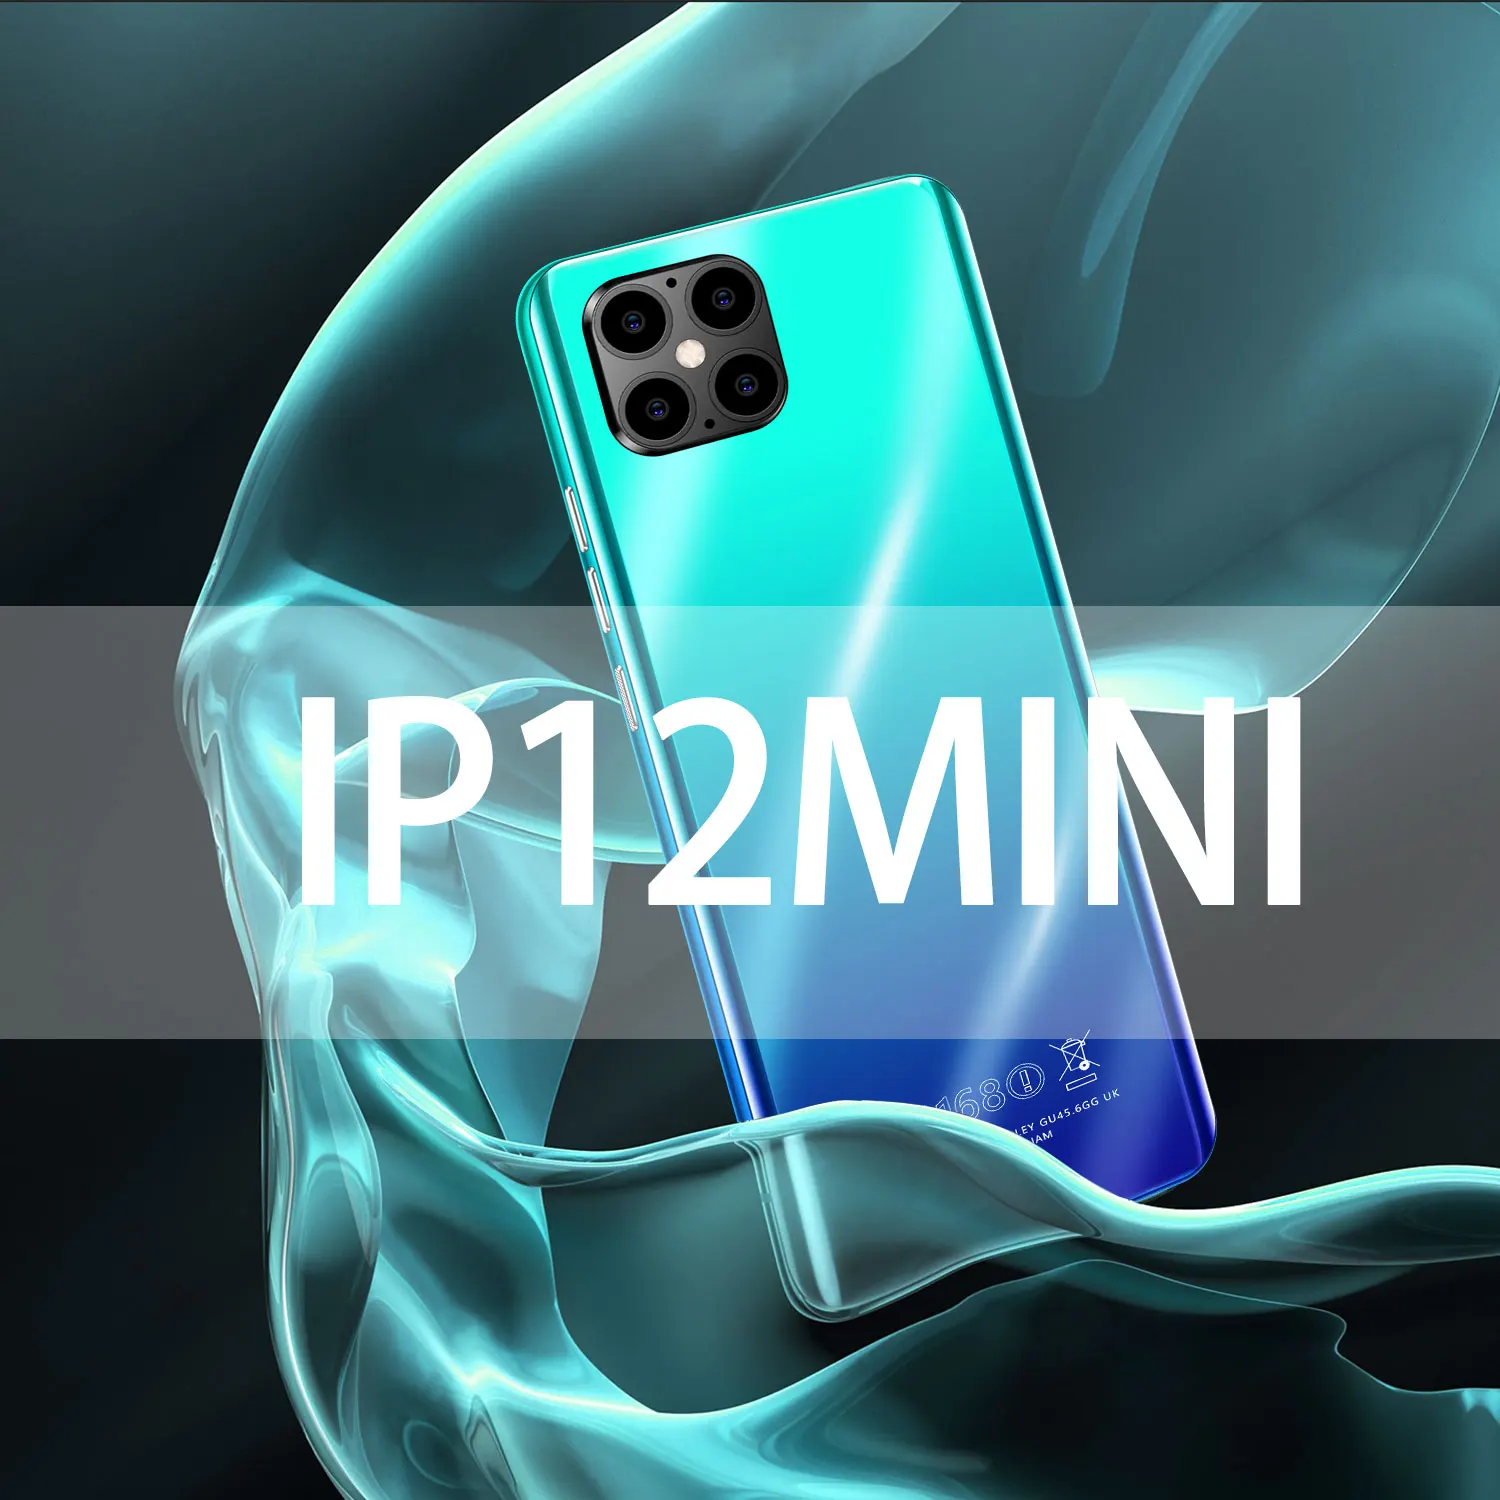 

Limit Global Version IP12 mini 5.8" 4800mAh 4G 64G Smartphones Octa Core Face ID Unlocked Android Cellphone Mobile Phones Play